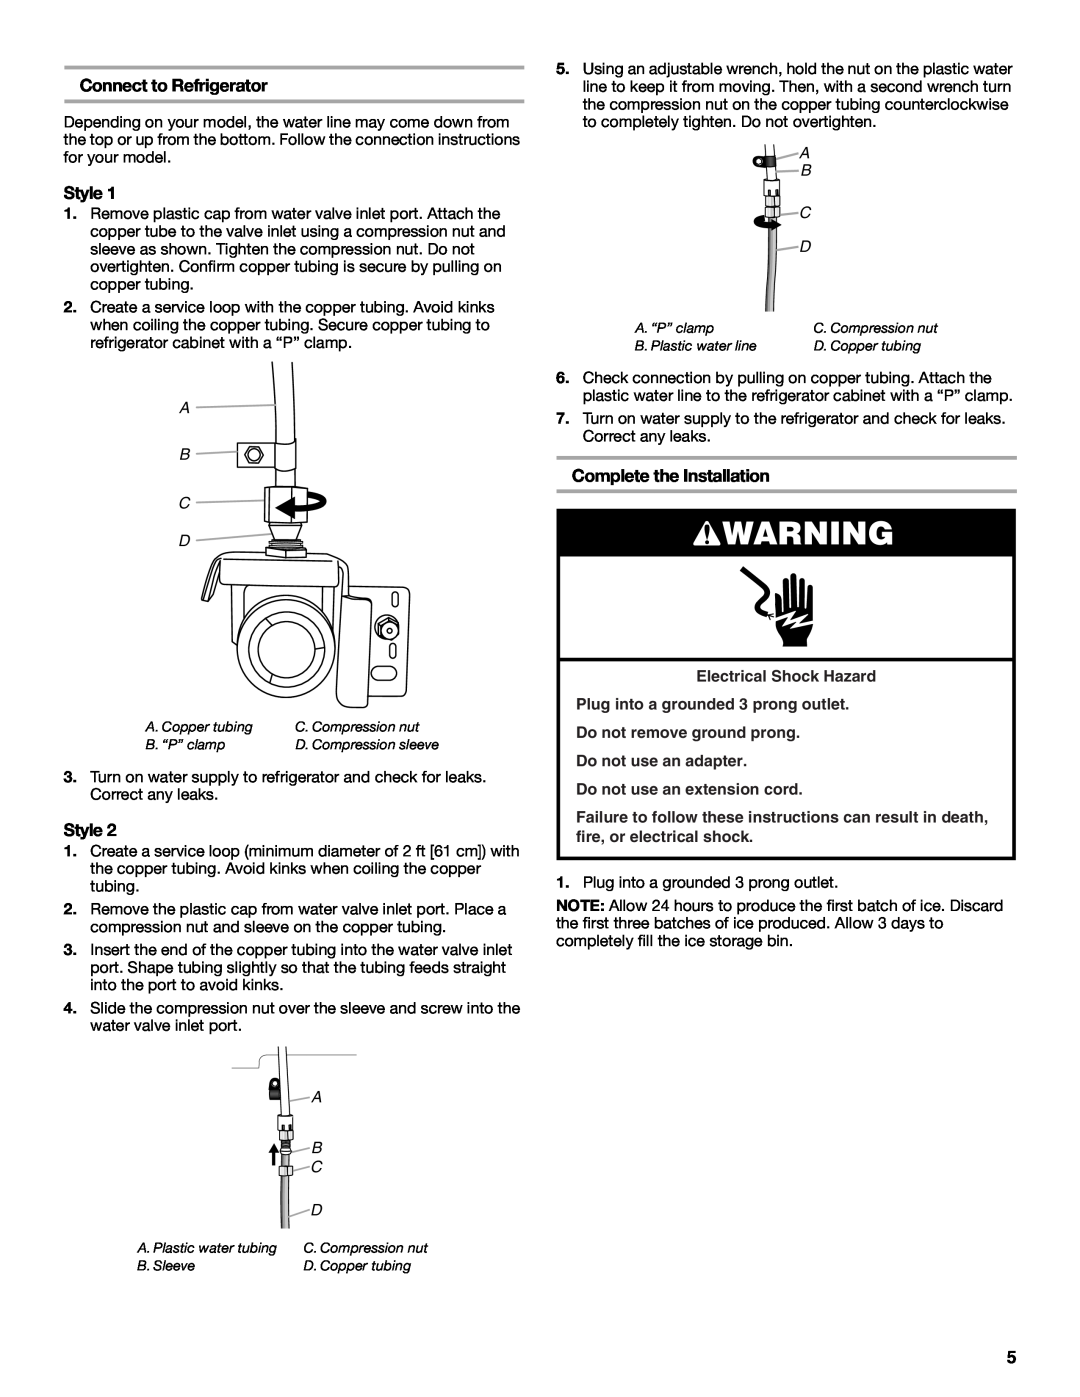 Maytag W10366206A Connect to Refrigerator, Style, Complete the Installation, A B C D, Do not use an extension cord 